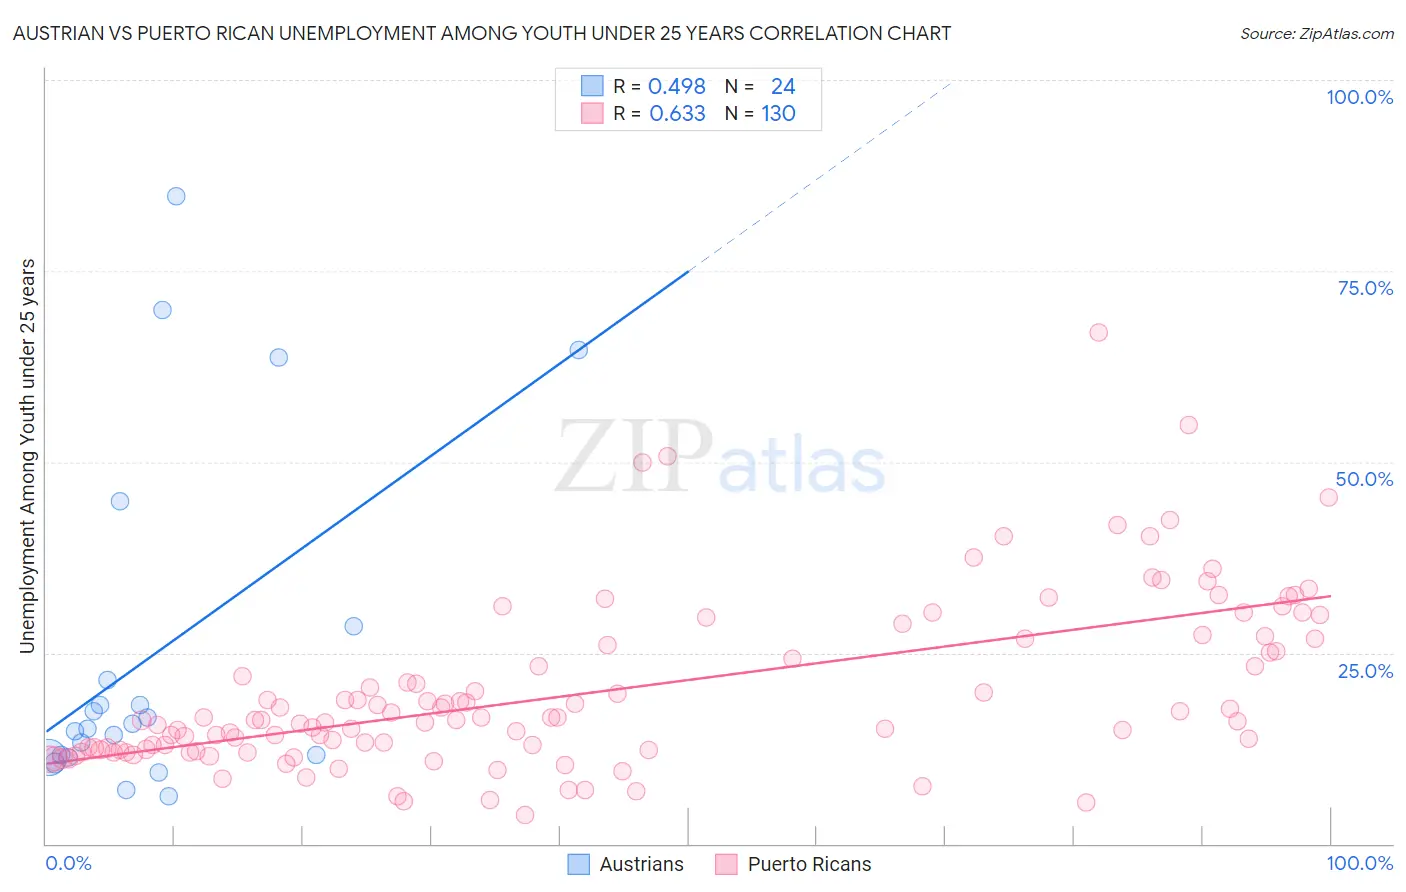 Austrian vs Puerto Rican Unemployment Among Youth under 25 years